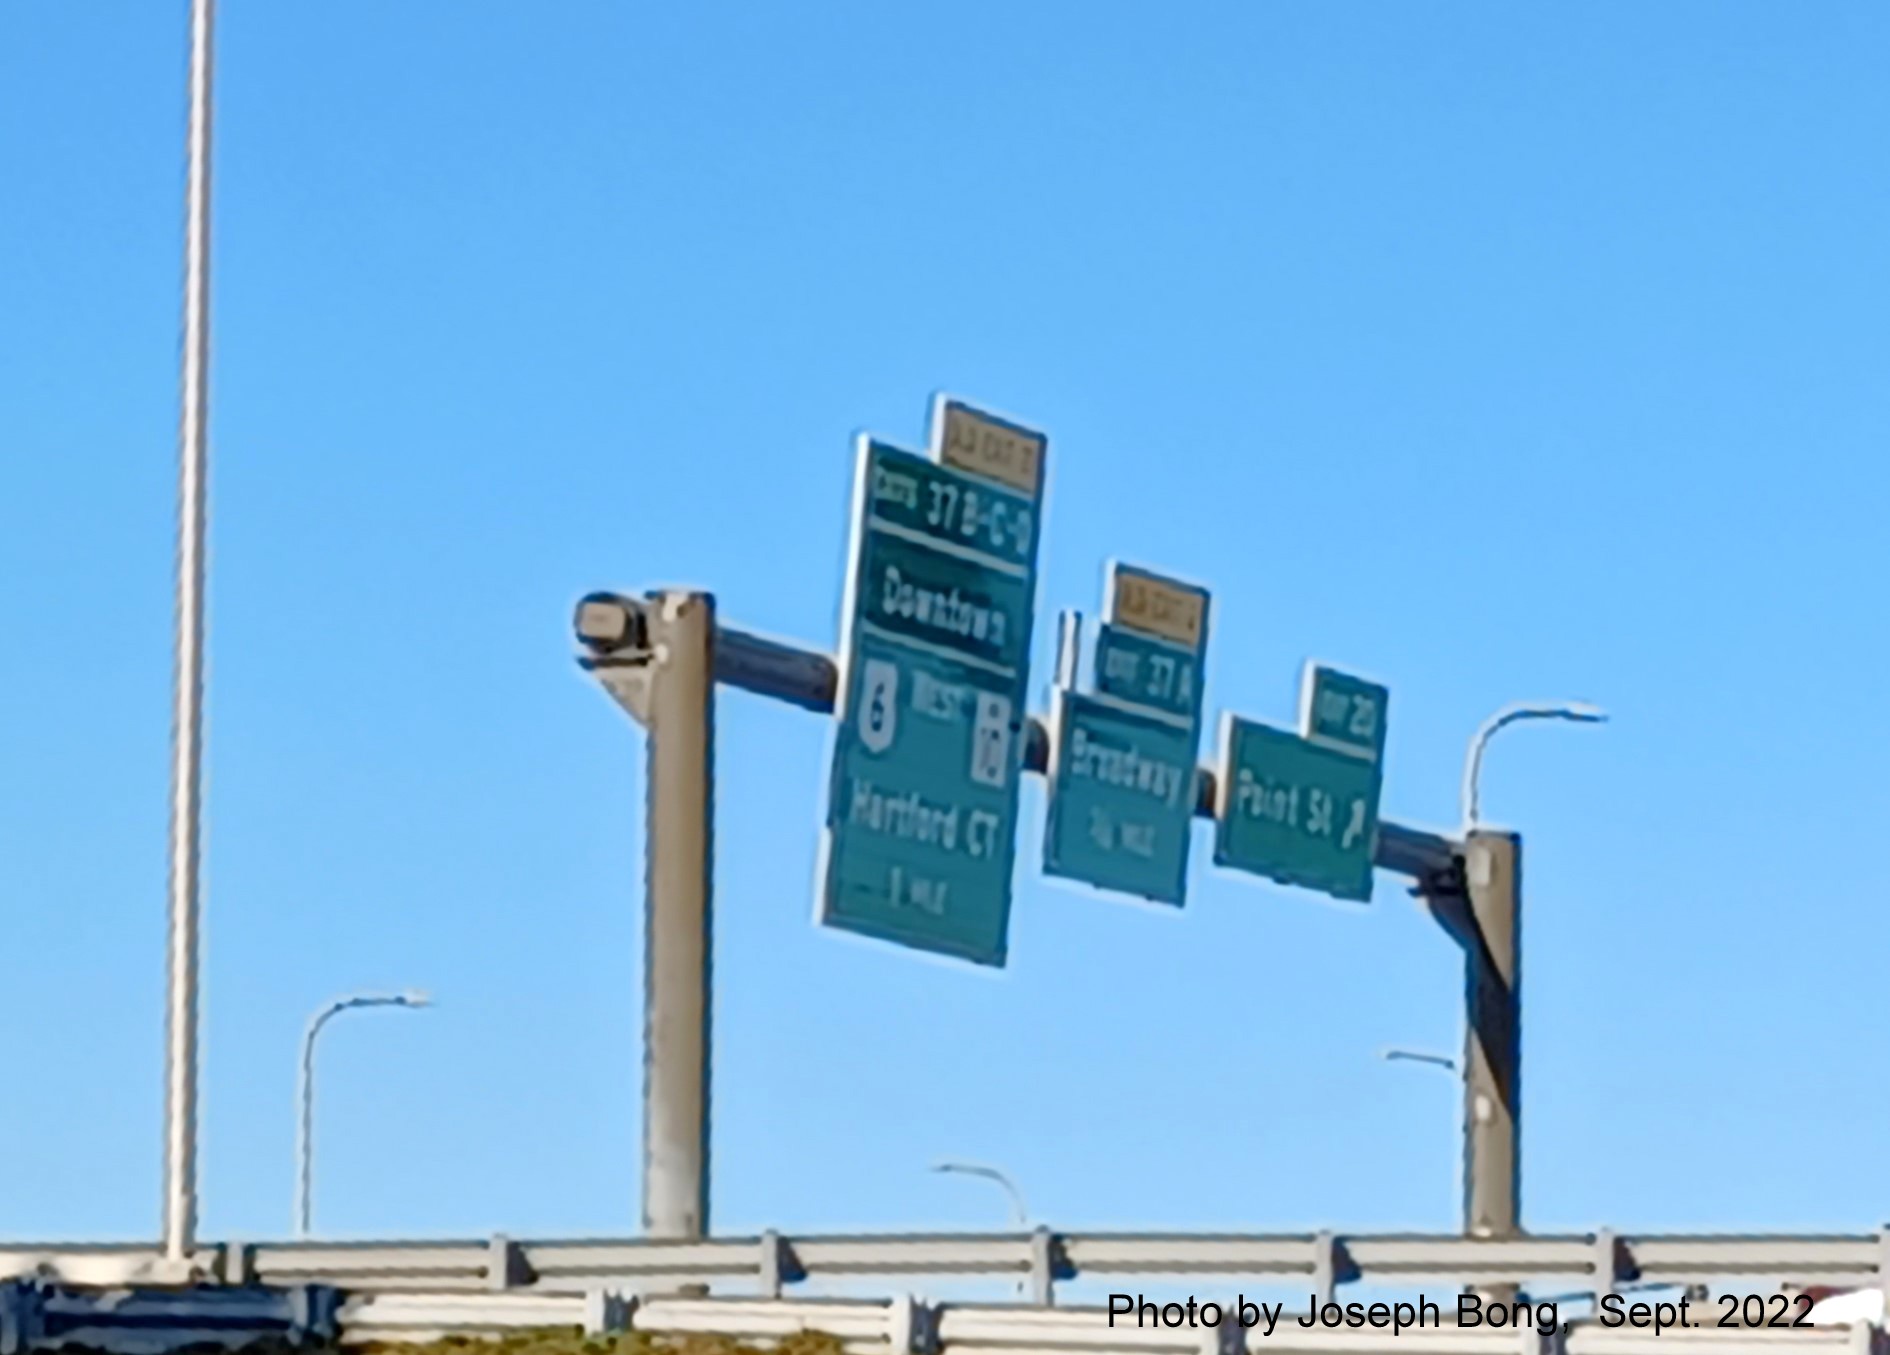 Image of overhead signs for US 6 West/RI 10 exits with new milepost based exit numbers,
                                         by Joseph Bong, September 2022